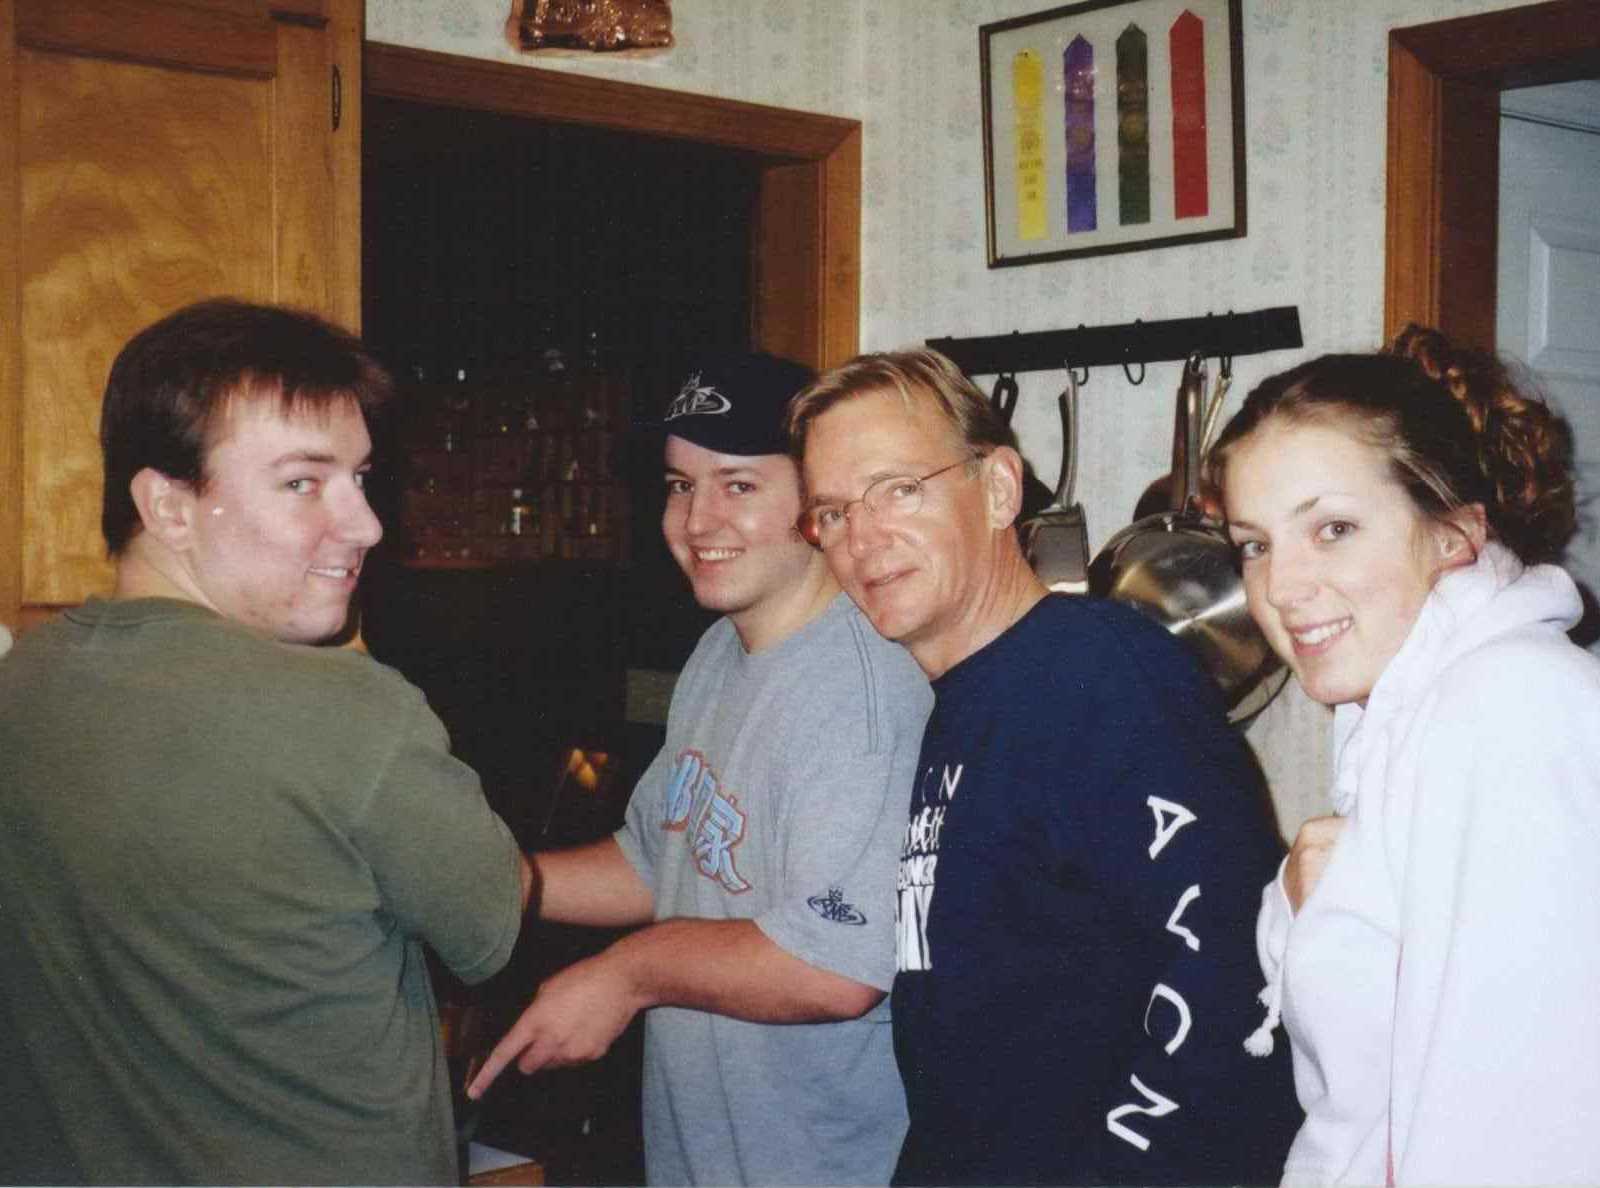 father stands in kitchen smiling next to daughter and two sons